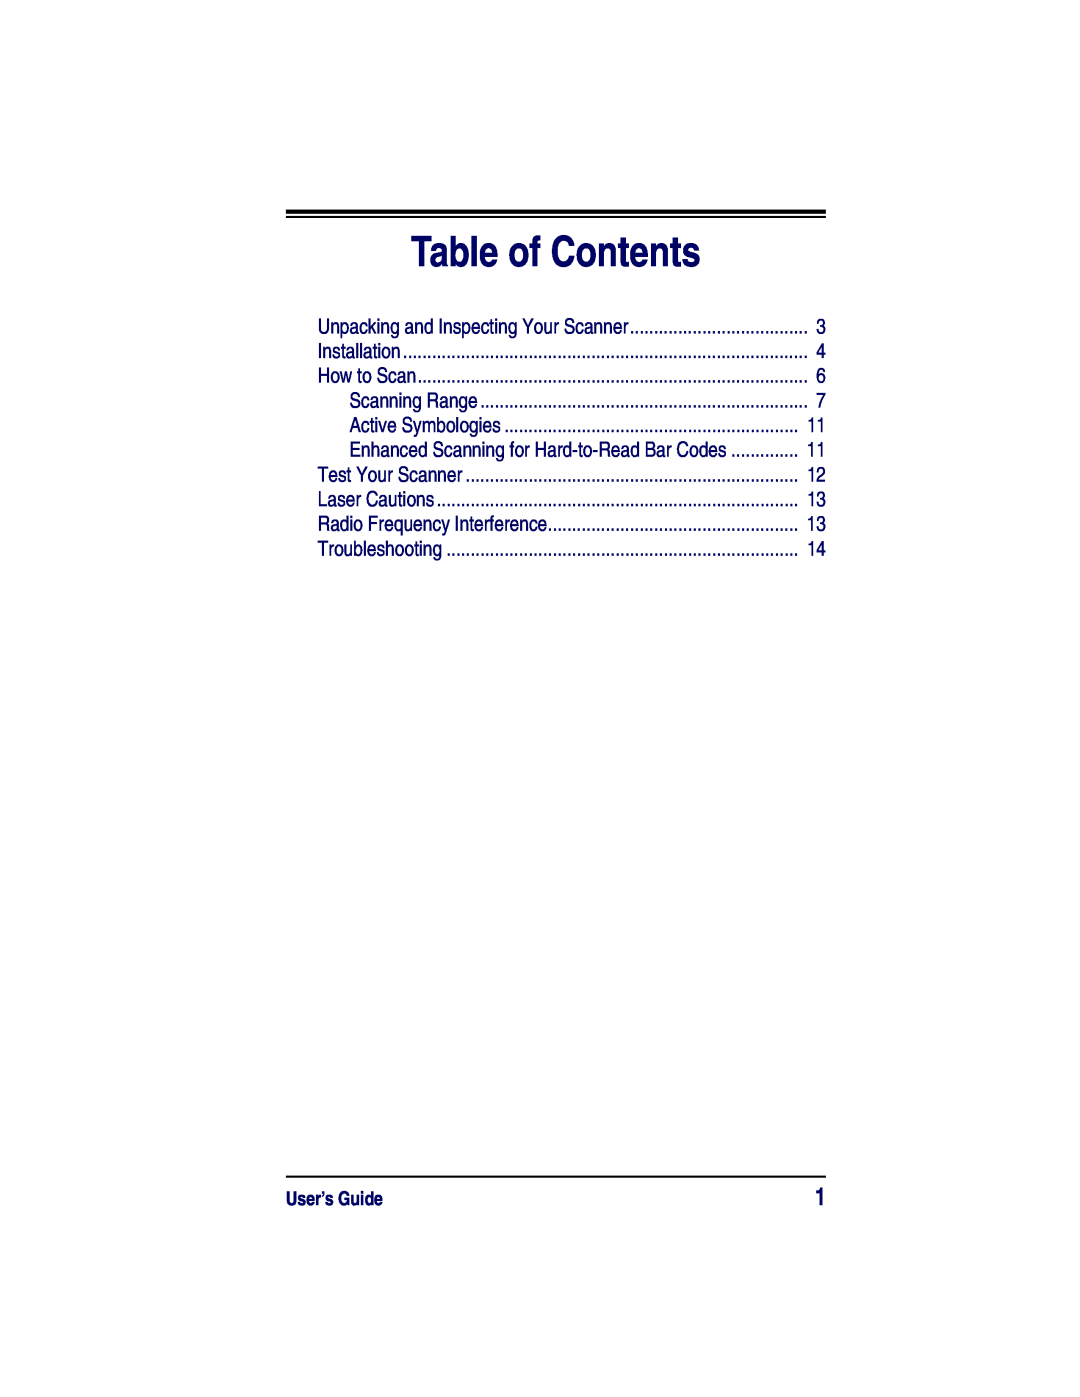 Datalogic Scanning HD, SR, XLR Table of Contents, User’s Guide, Enhanced Scanning for Hard-to-ReadBar Codes, Installation 